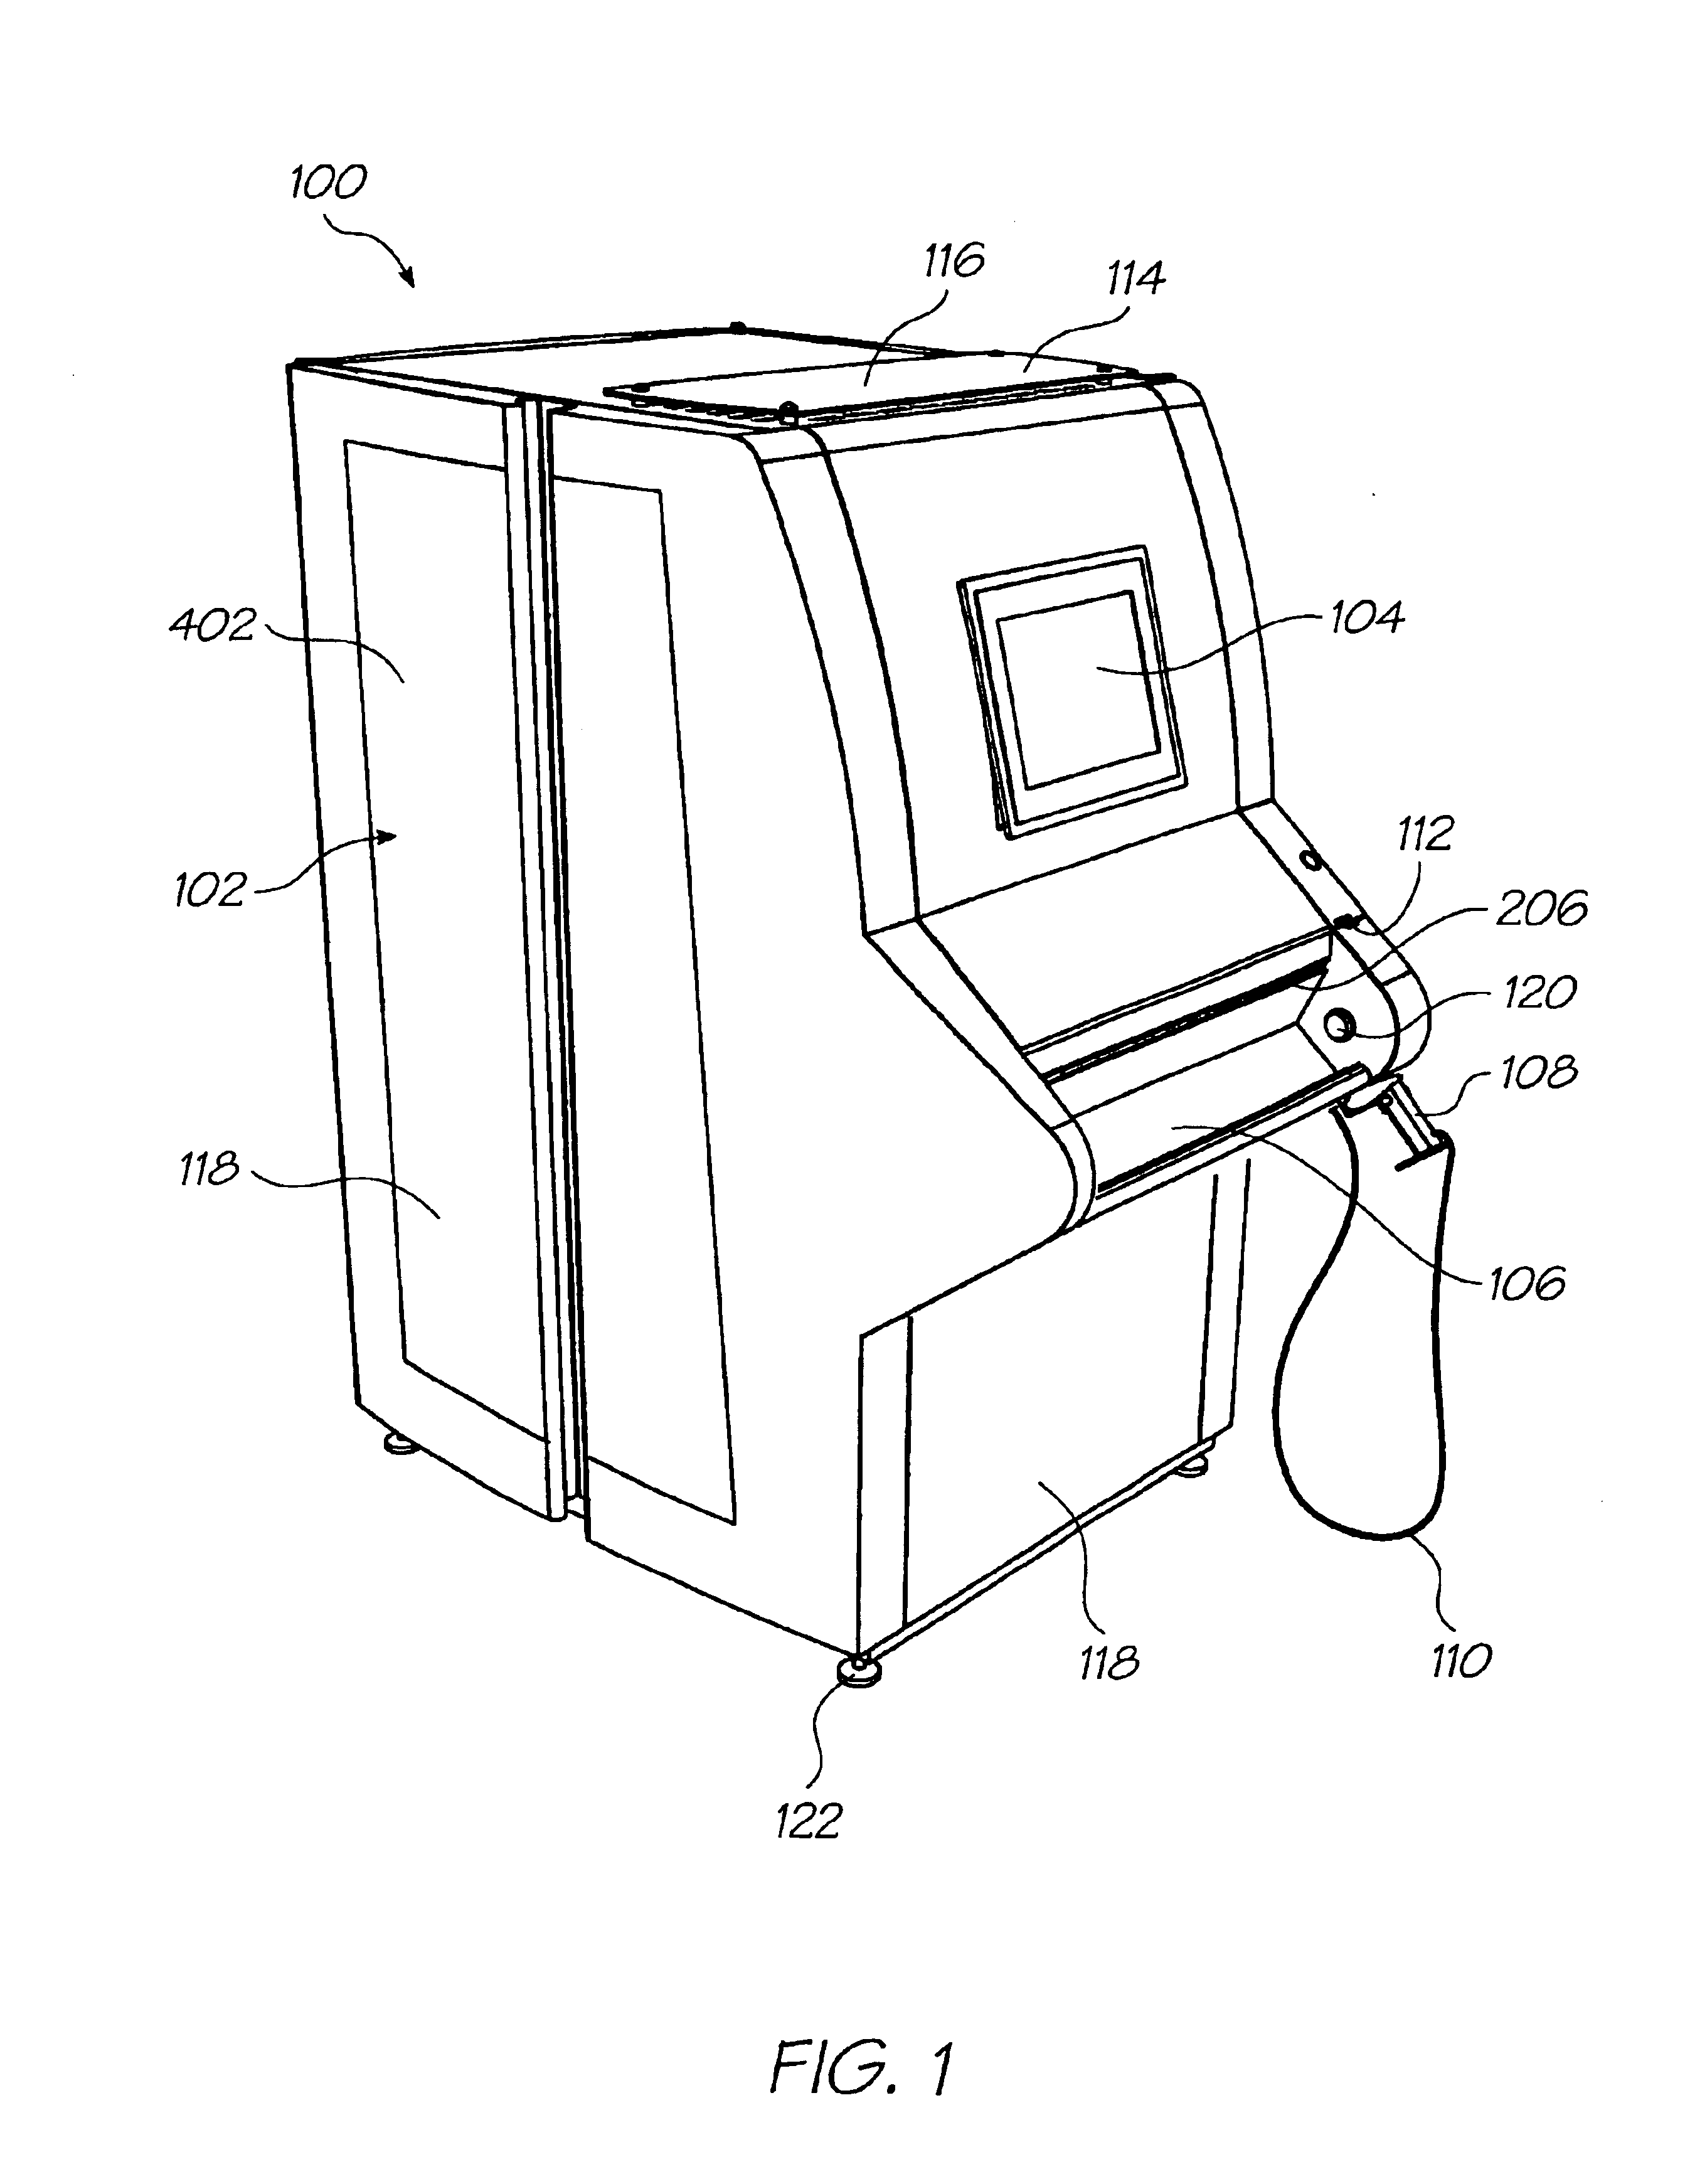 In-line dryer for a printer